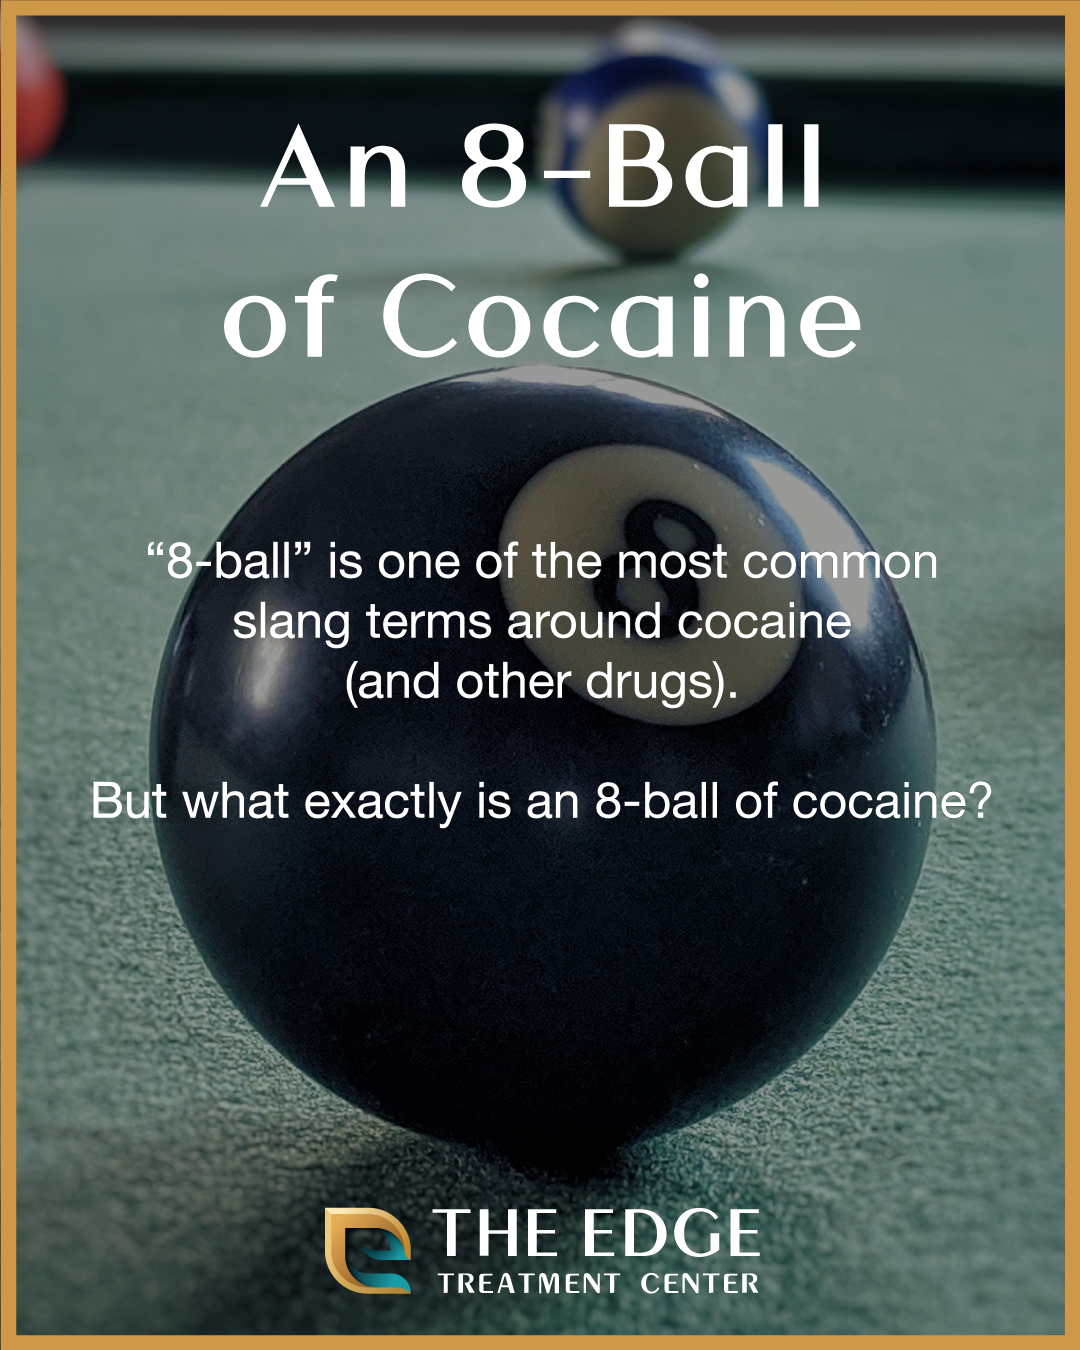 What Is an 8-Ball of cocaine?